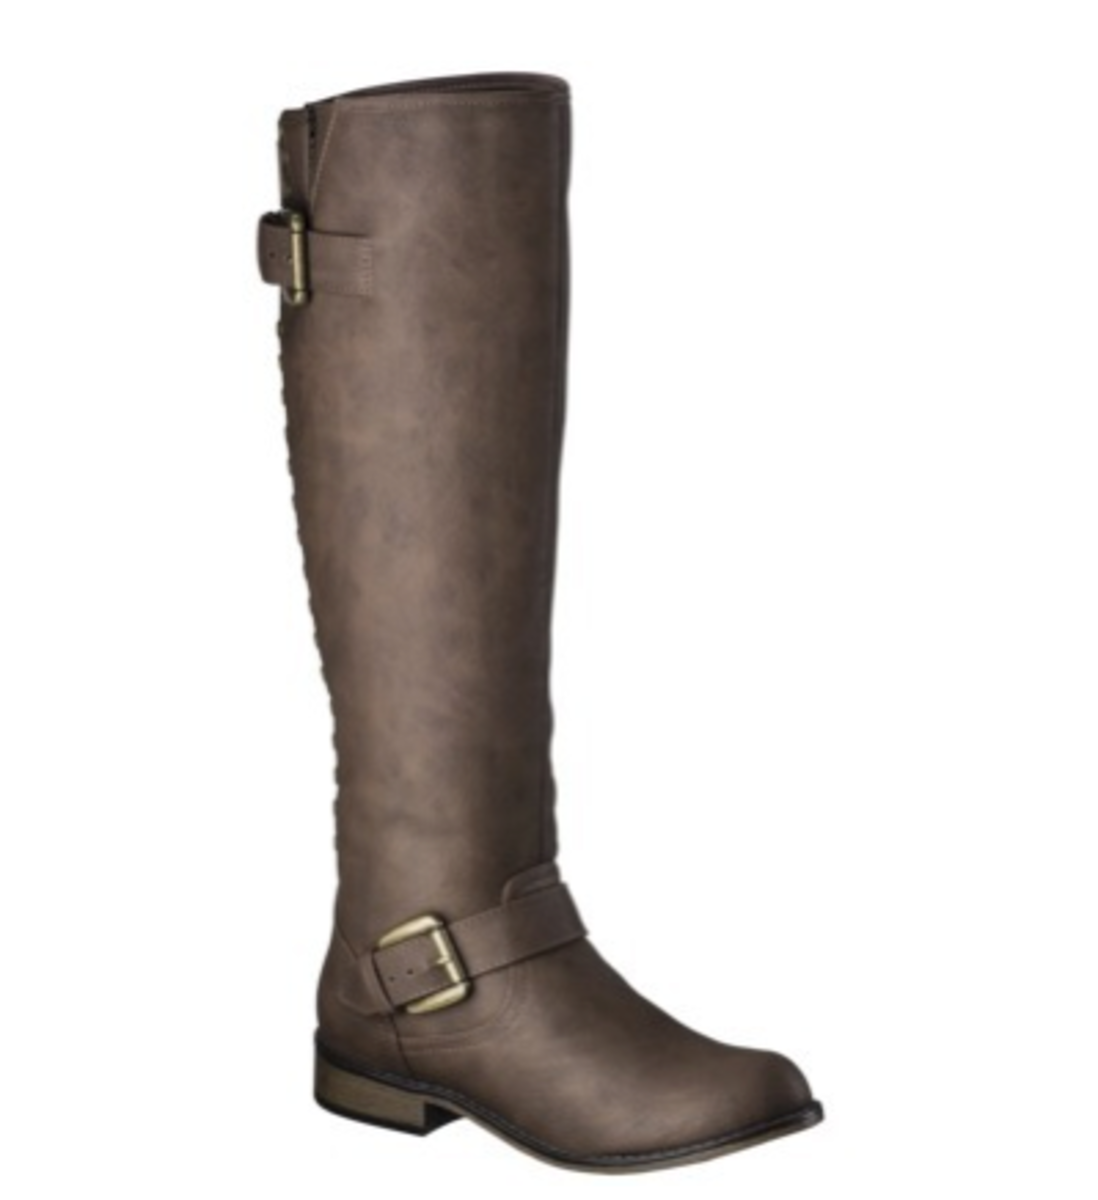 Howdy Slim! Riding Boots for Thin Calves: Which matters more for narrow  calf boots -- the top or the ankle?